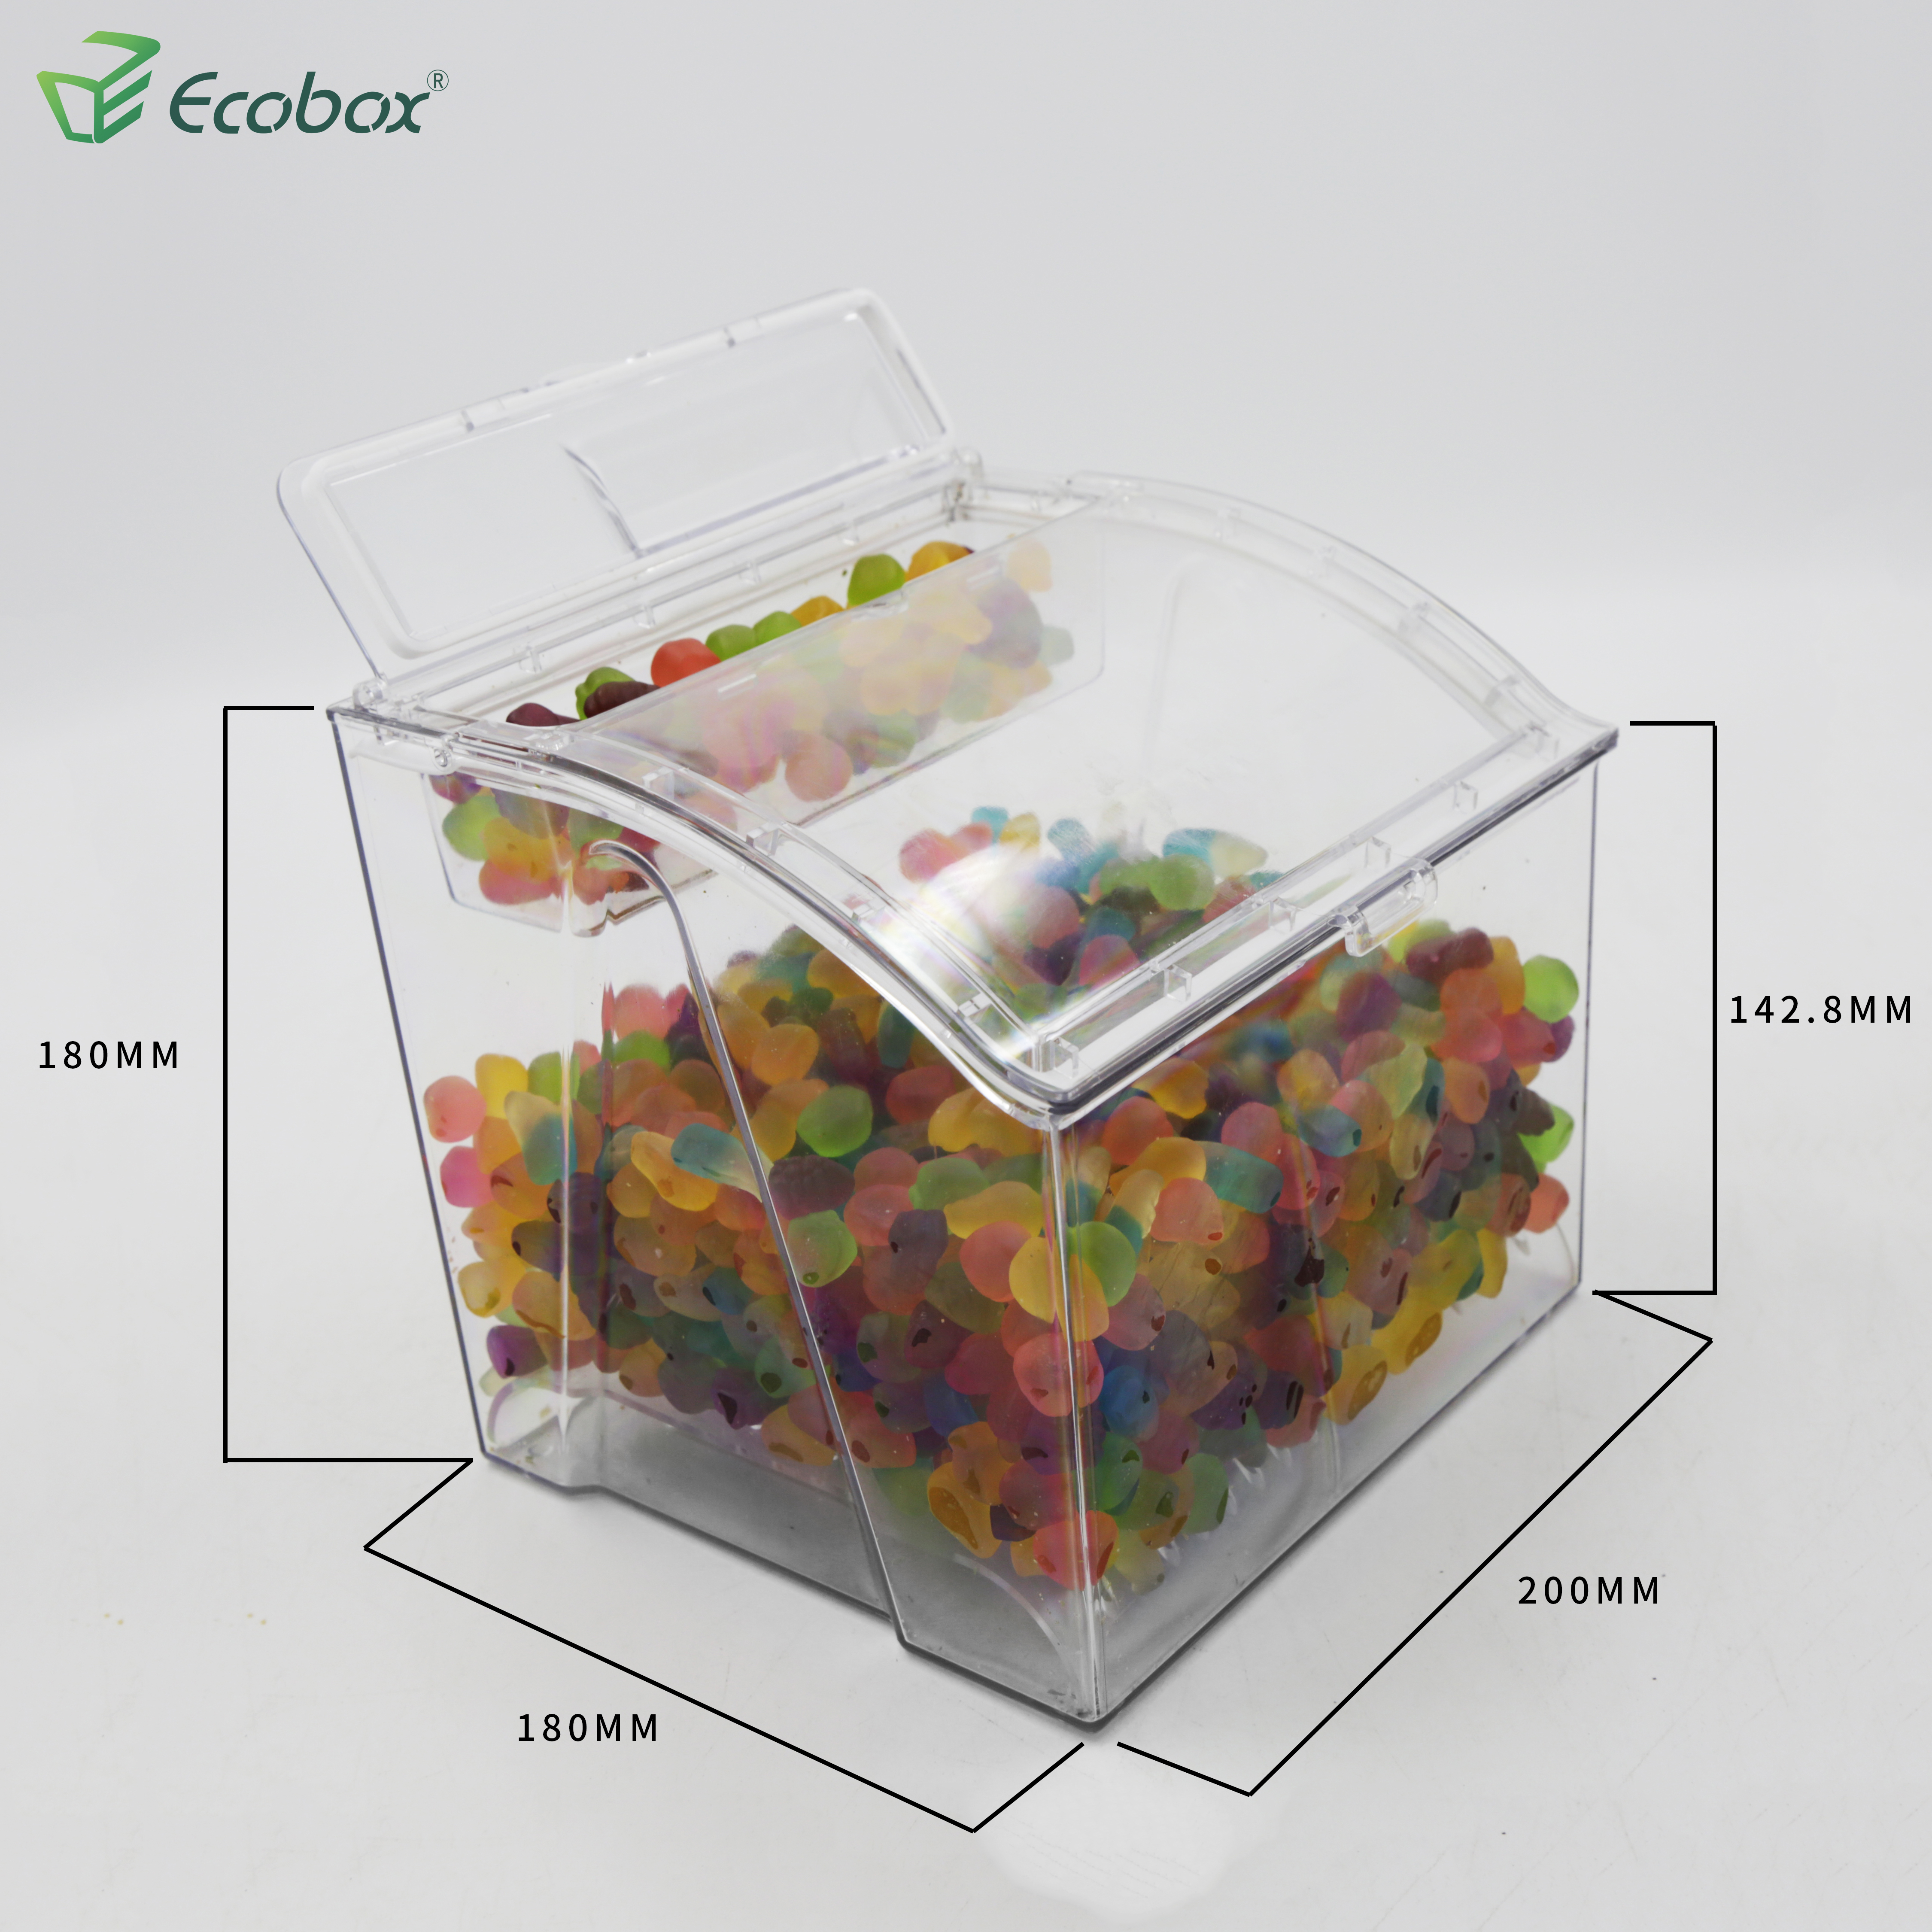 Ecobox SPH-055 airtight candy bin with drawer inside